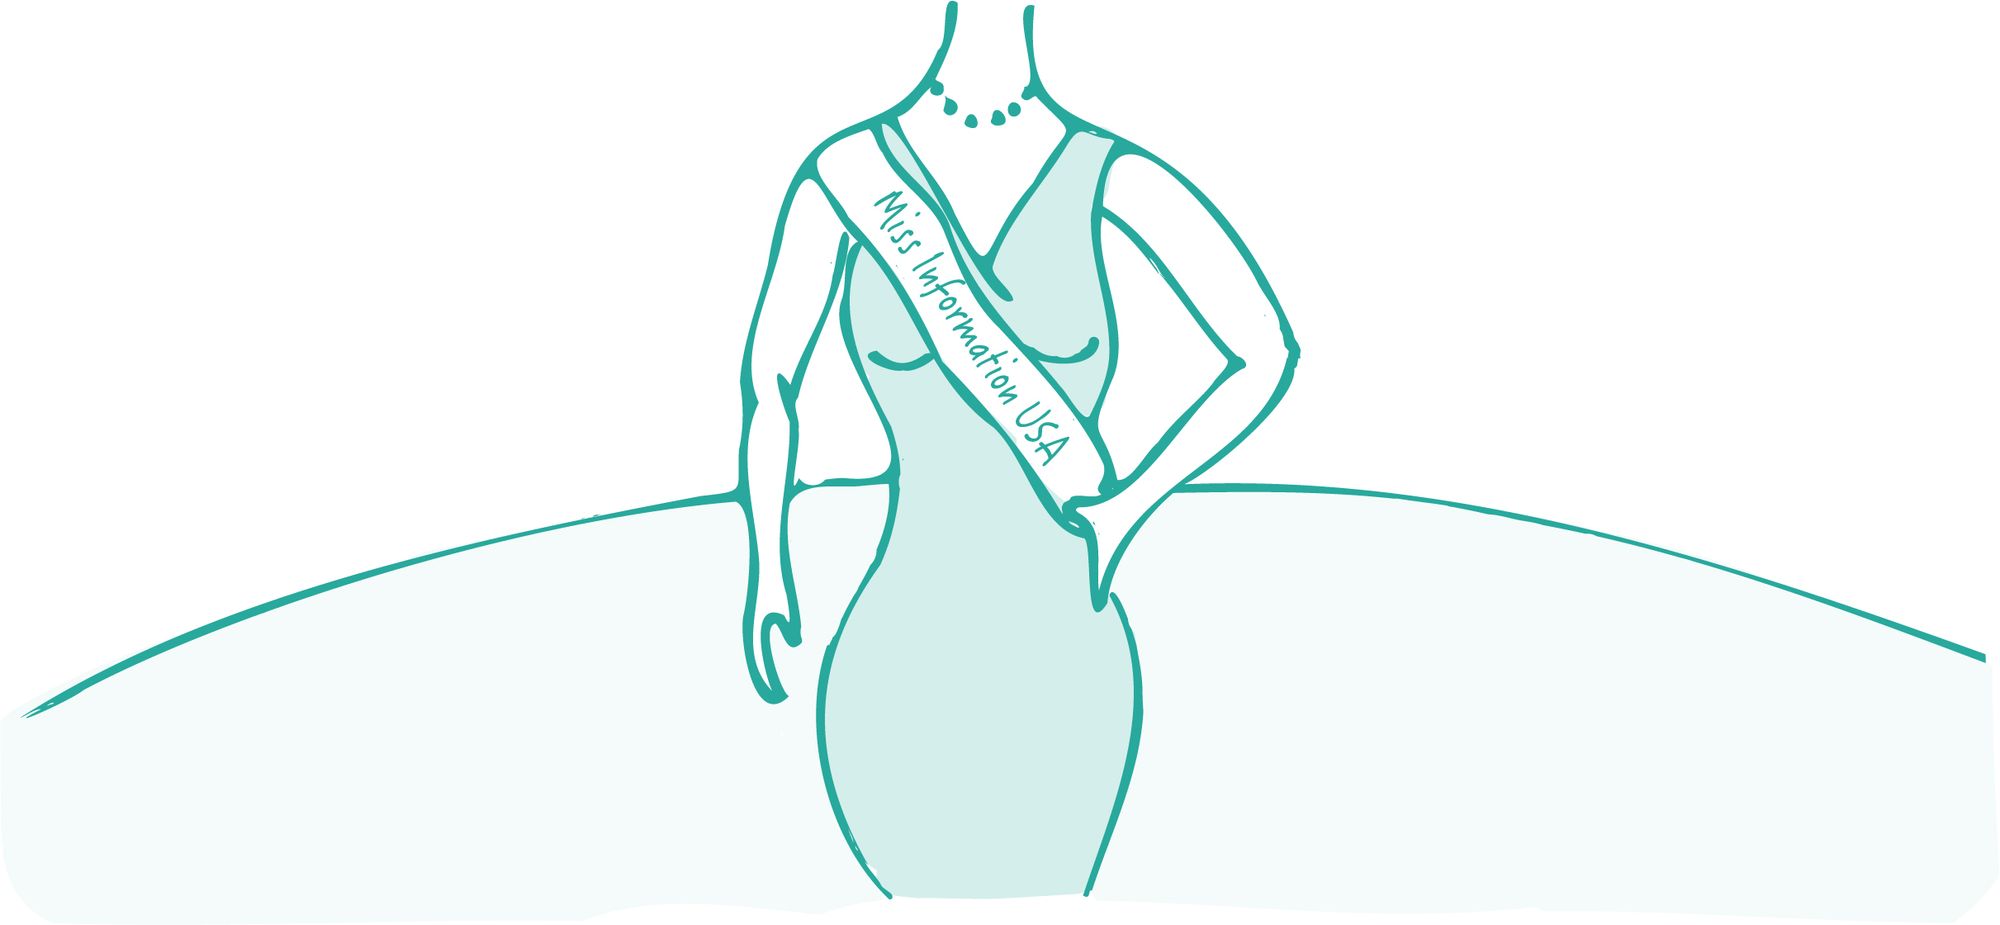 The Miss Information Beauty Pageant